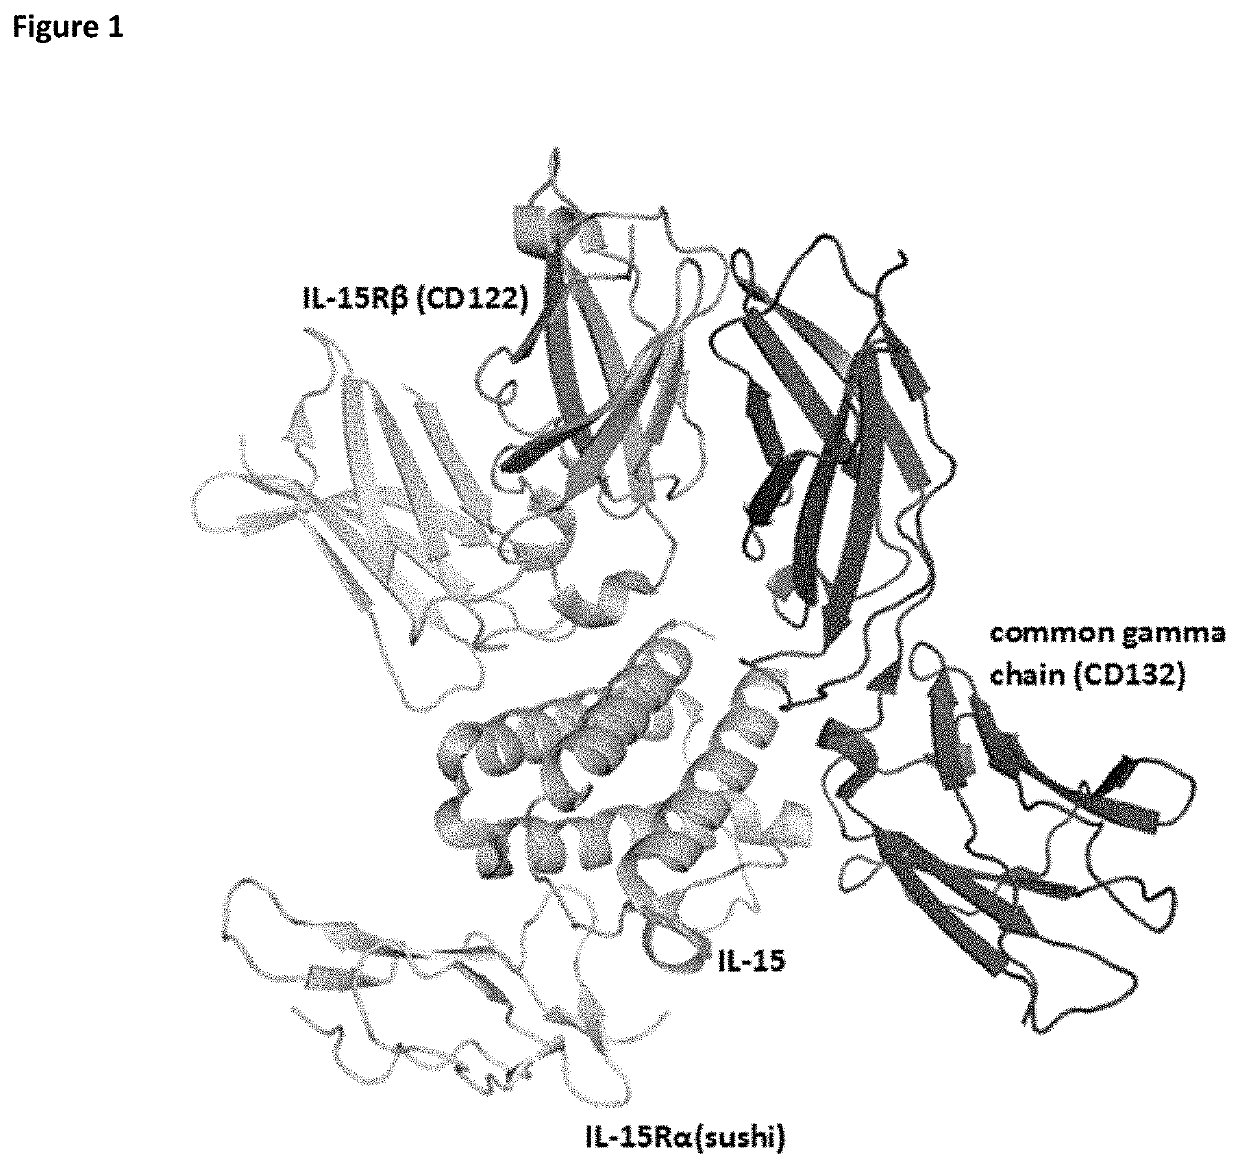 PD-1 TARGETED HETERODIMERIC FUSION PROTEINS CONTAINING IL-15/IL-15Ra Fc-FUSION PROTEINS AND PD-1 ANTIGEN BINDING DOMAINS AND USES THEREOF